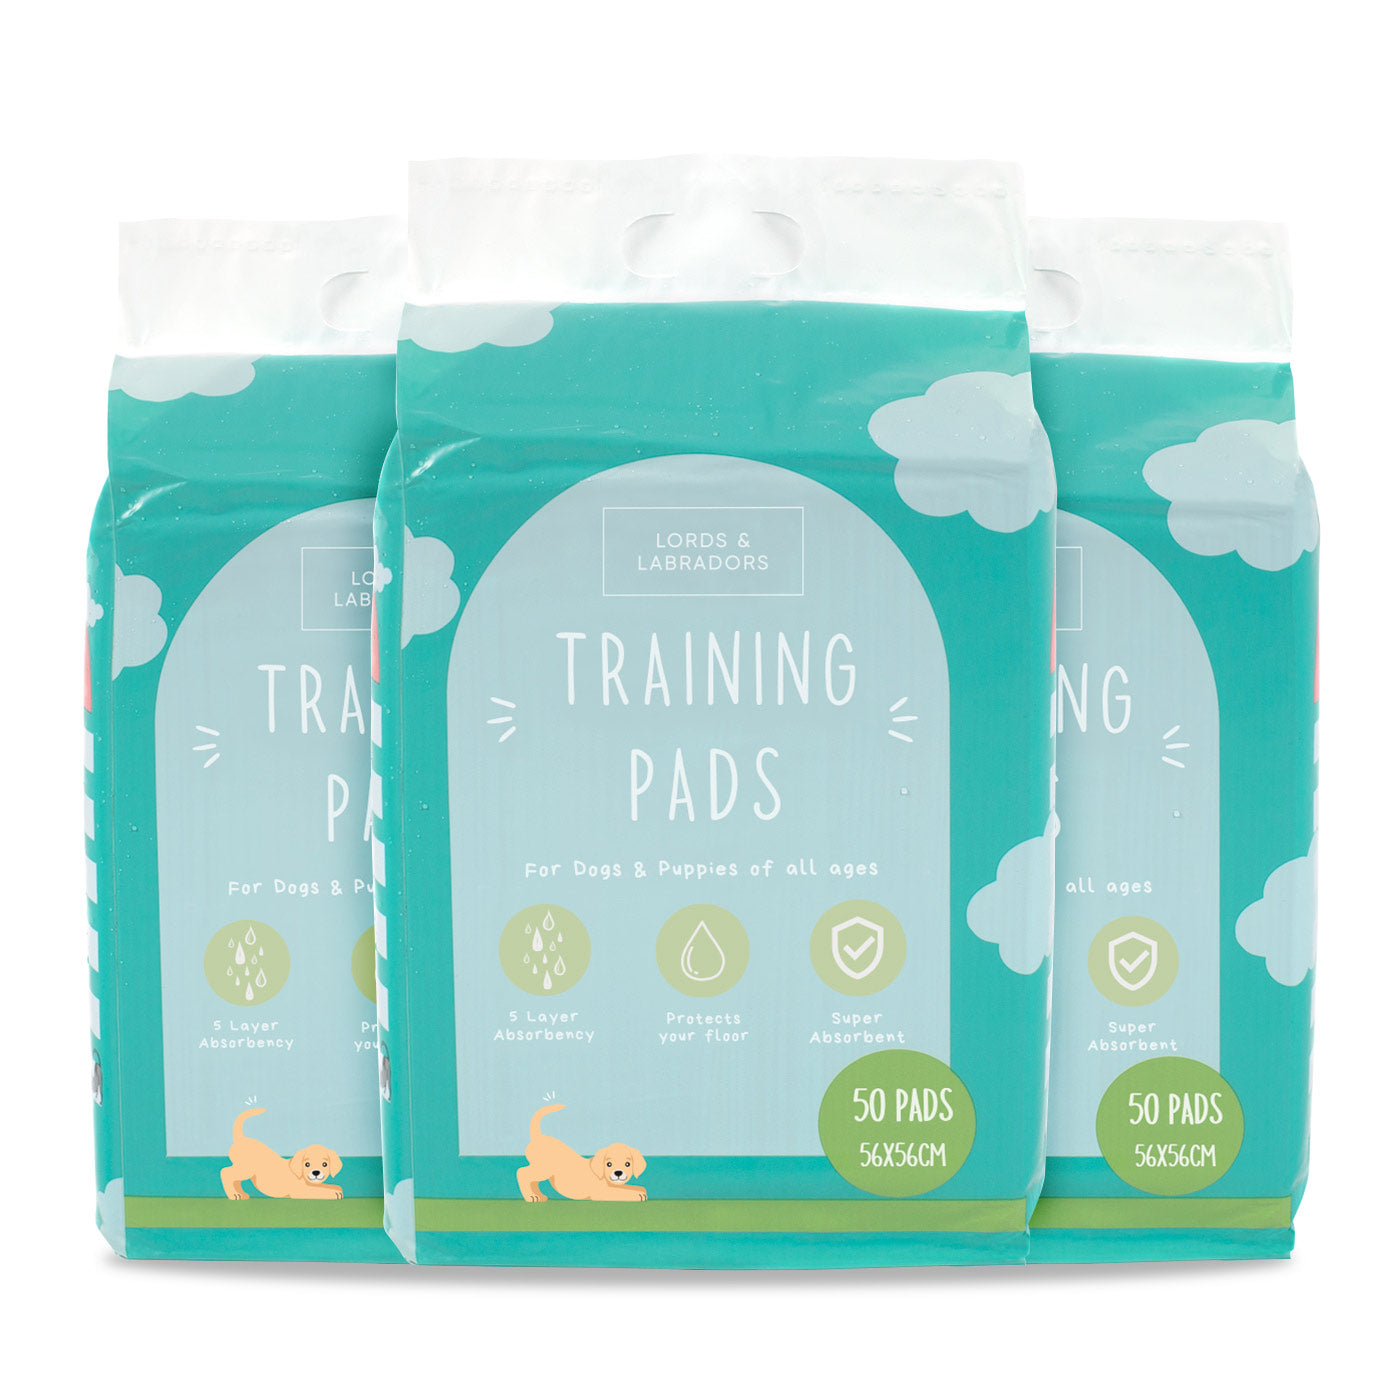 Puppy Training Pads Triple Pack by Lords & Labradors